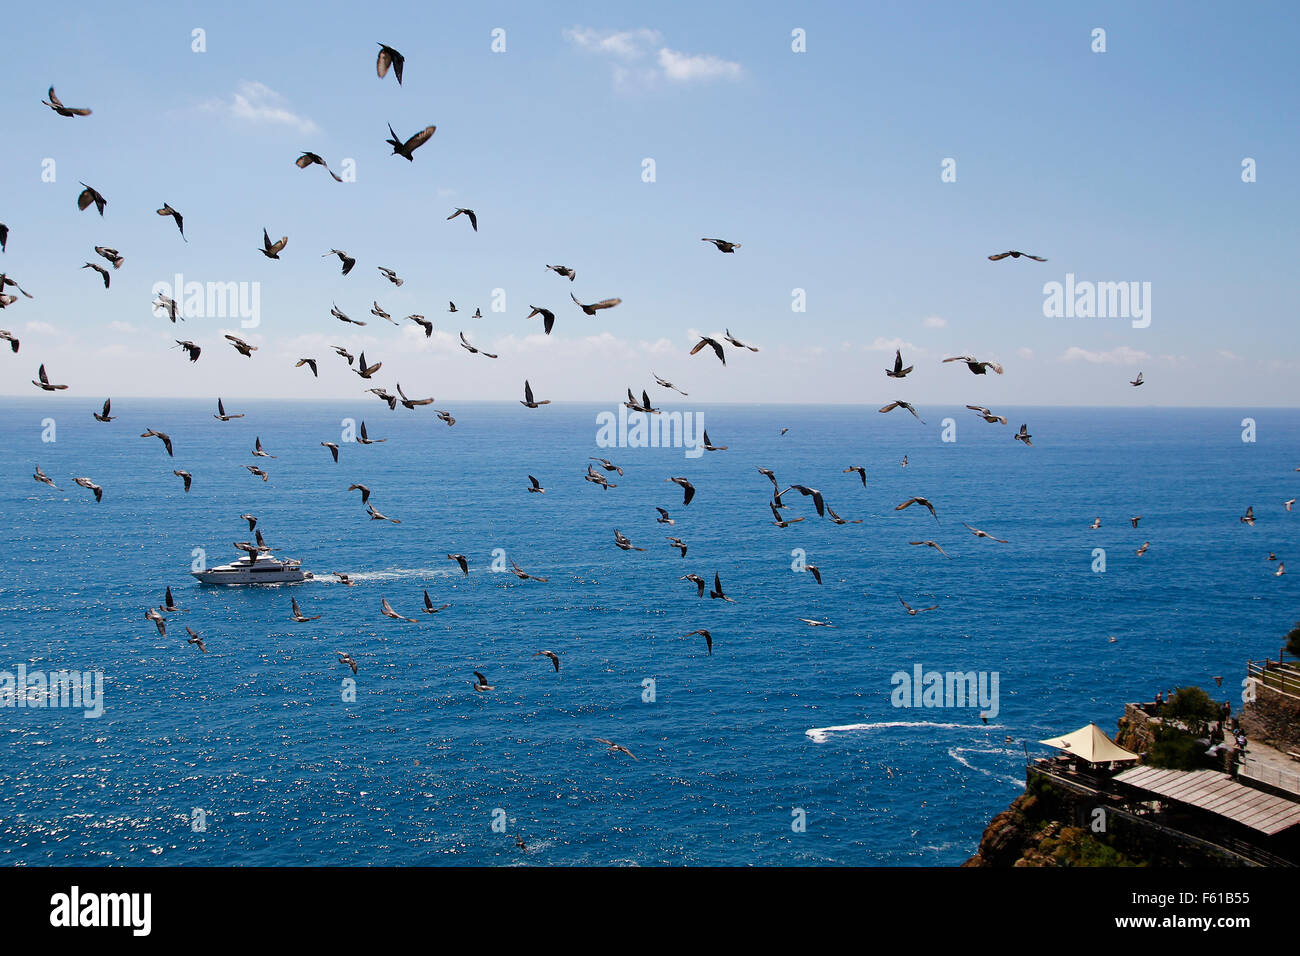 Flock of birds at the sea Stock Photo